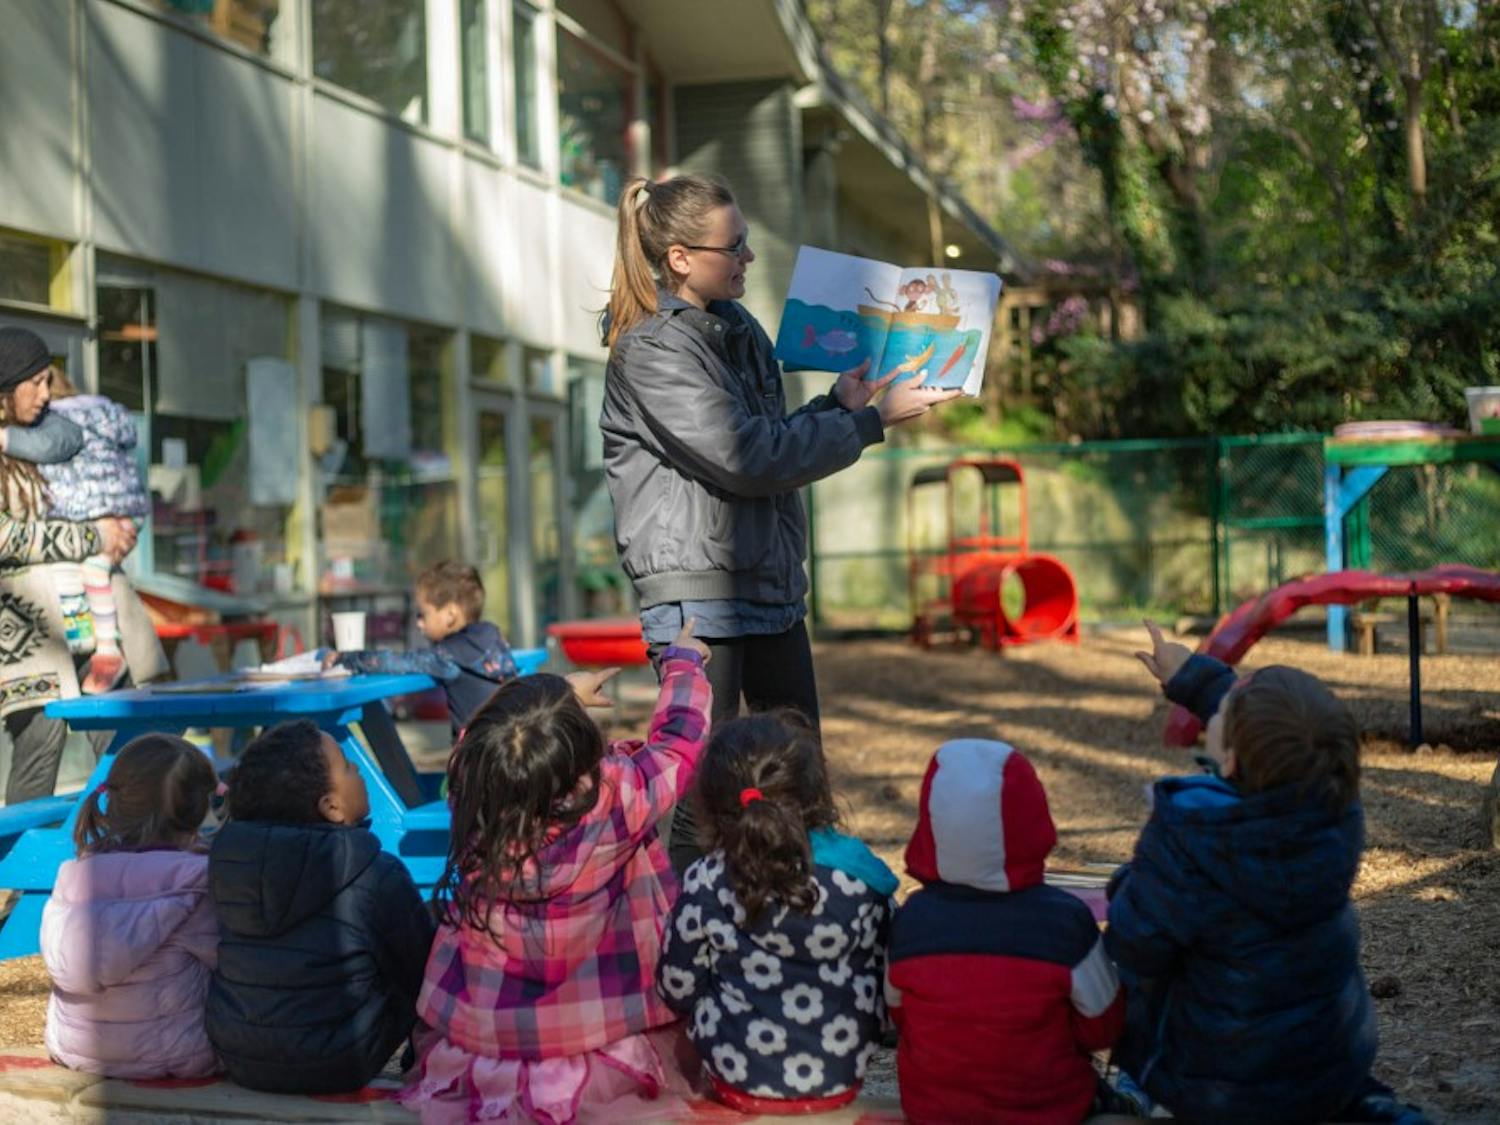 Eppie Landis (Center), a blue room teacher, reads for students at the Chapel Hill Cooperative Preschool on Monday, April 1st. The Cooperative Preschool system also finalized plans to consolidate their two Chapel Hill sites into a single facility on Monday, April 1, 2019.